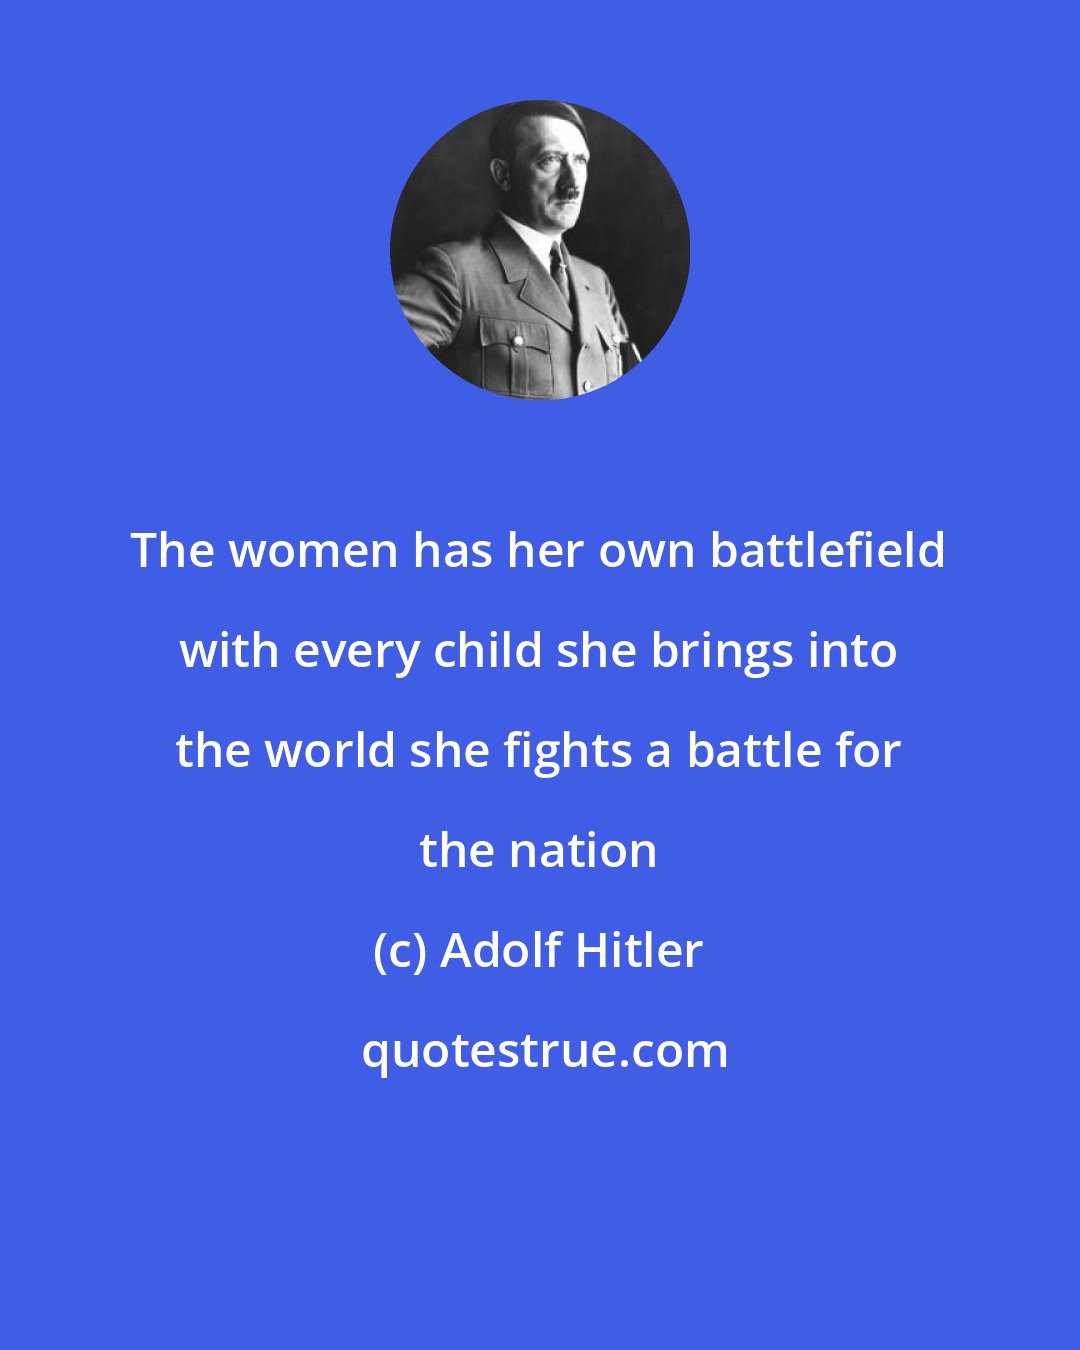 Adolf Hitler: The women has her own battlefield with every child she brings into the world she fights a battle for the nation